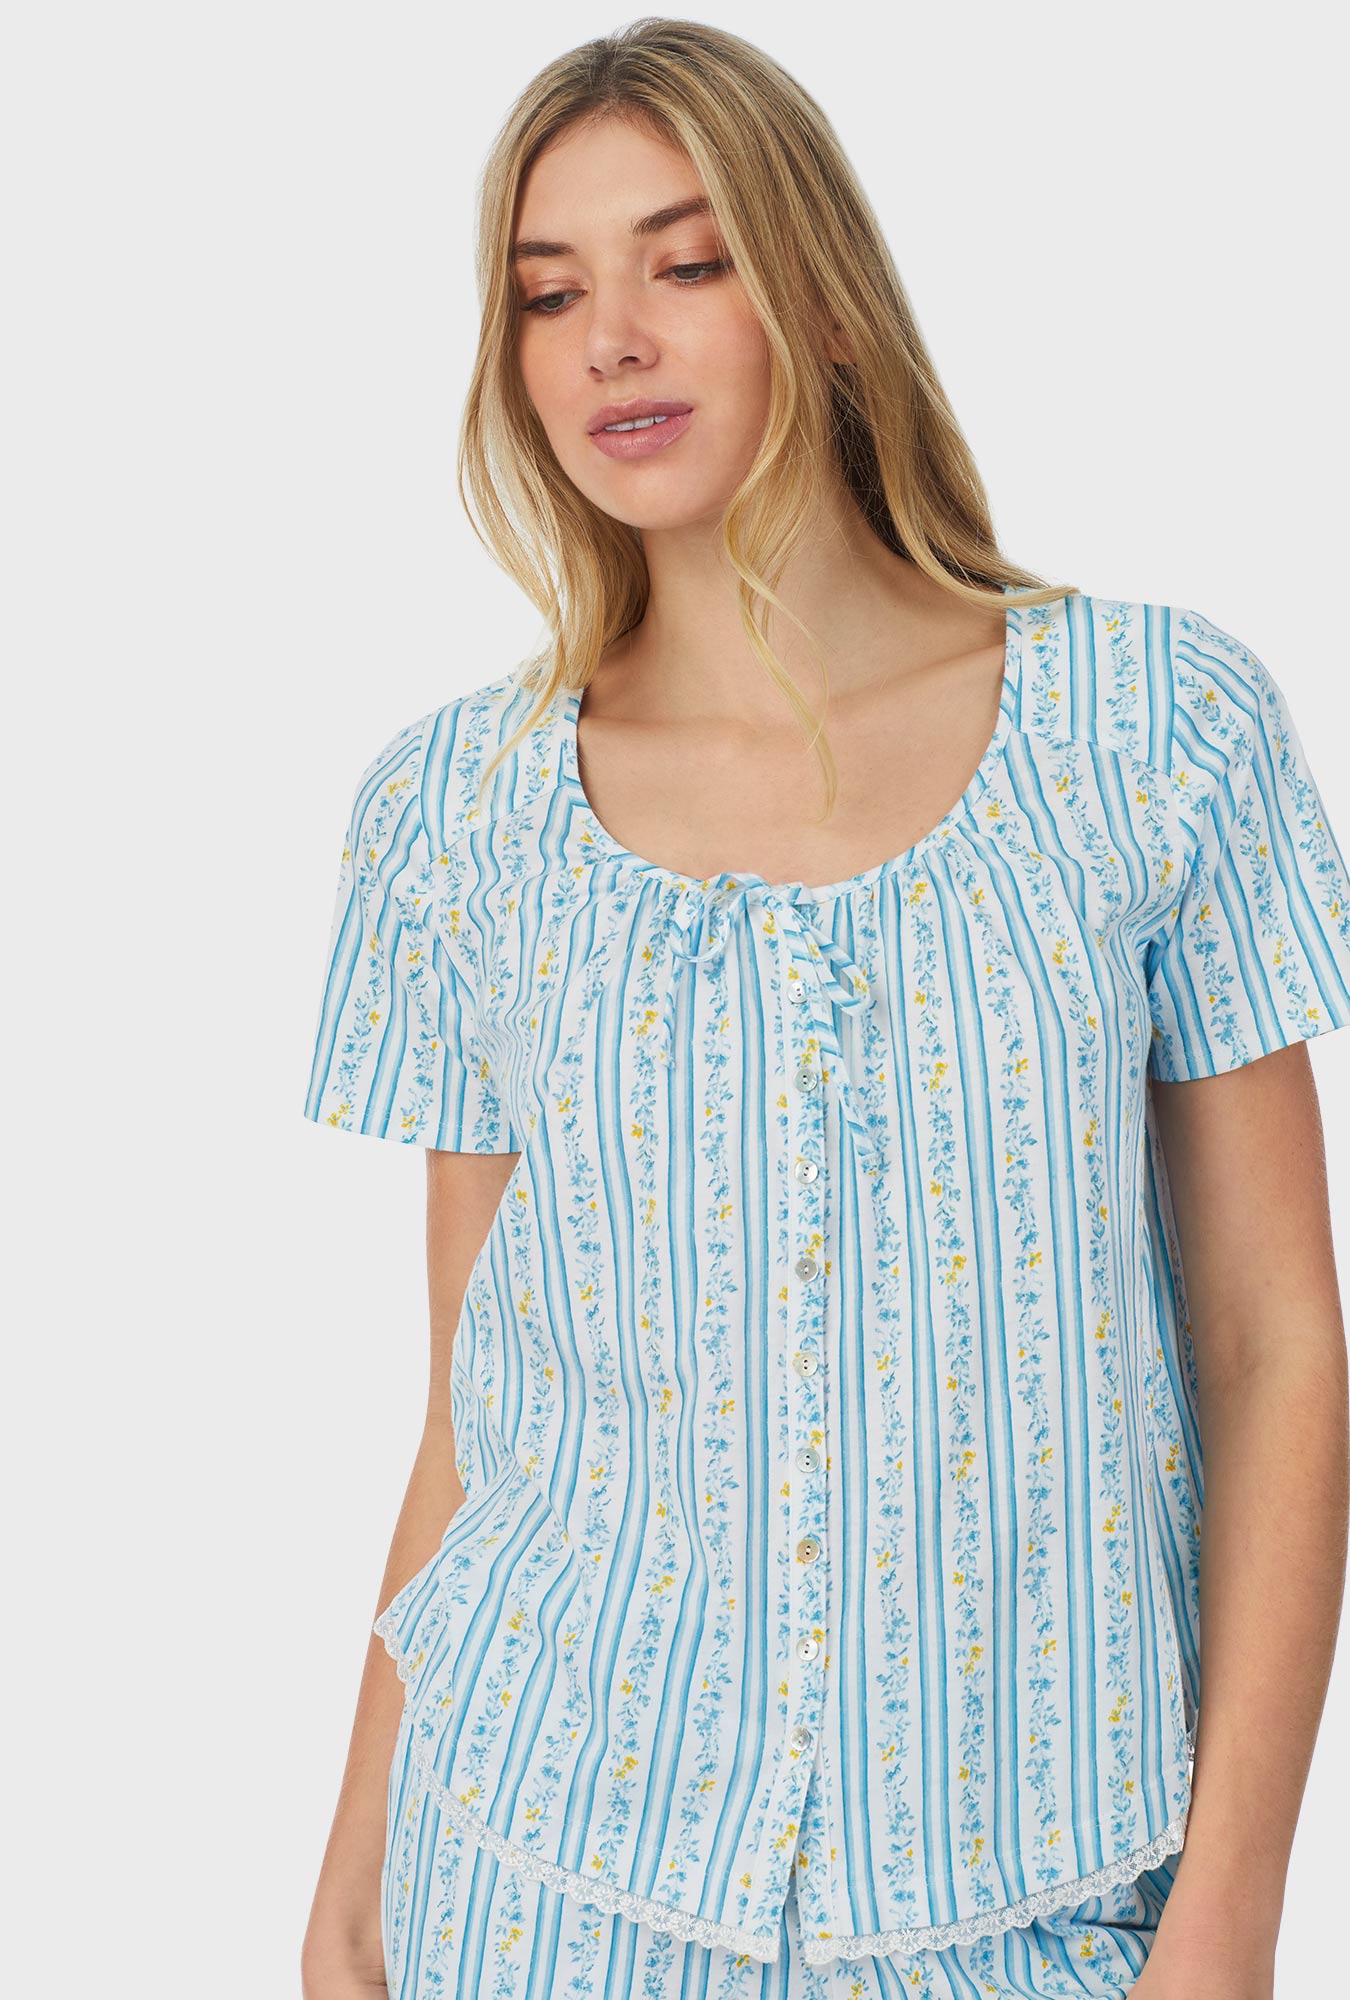 A lady wearing blue short sleeve bermuda pajama set with floral stripes.